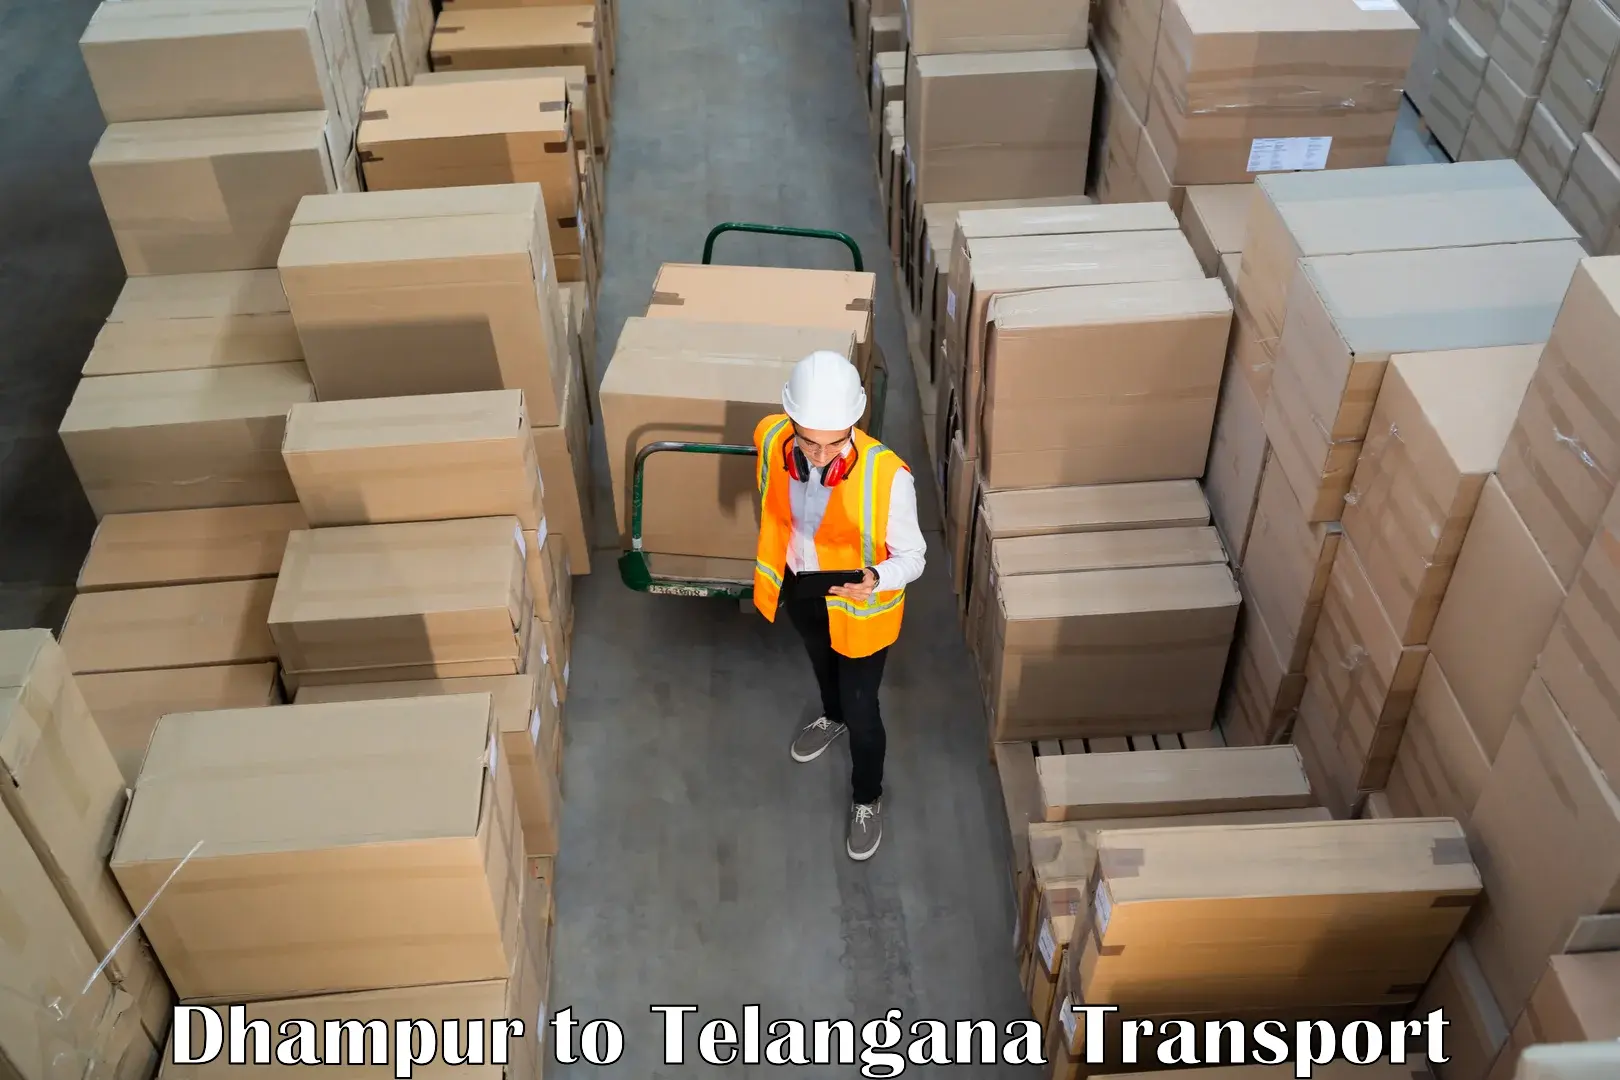 Goods delivery service Dhampur to Yellandu